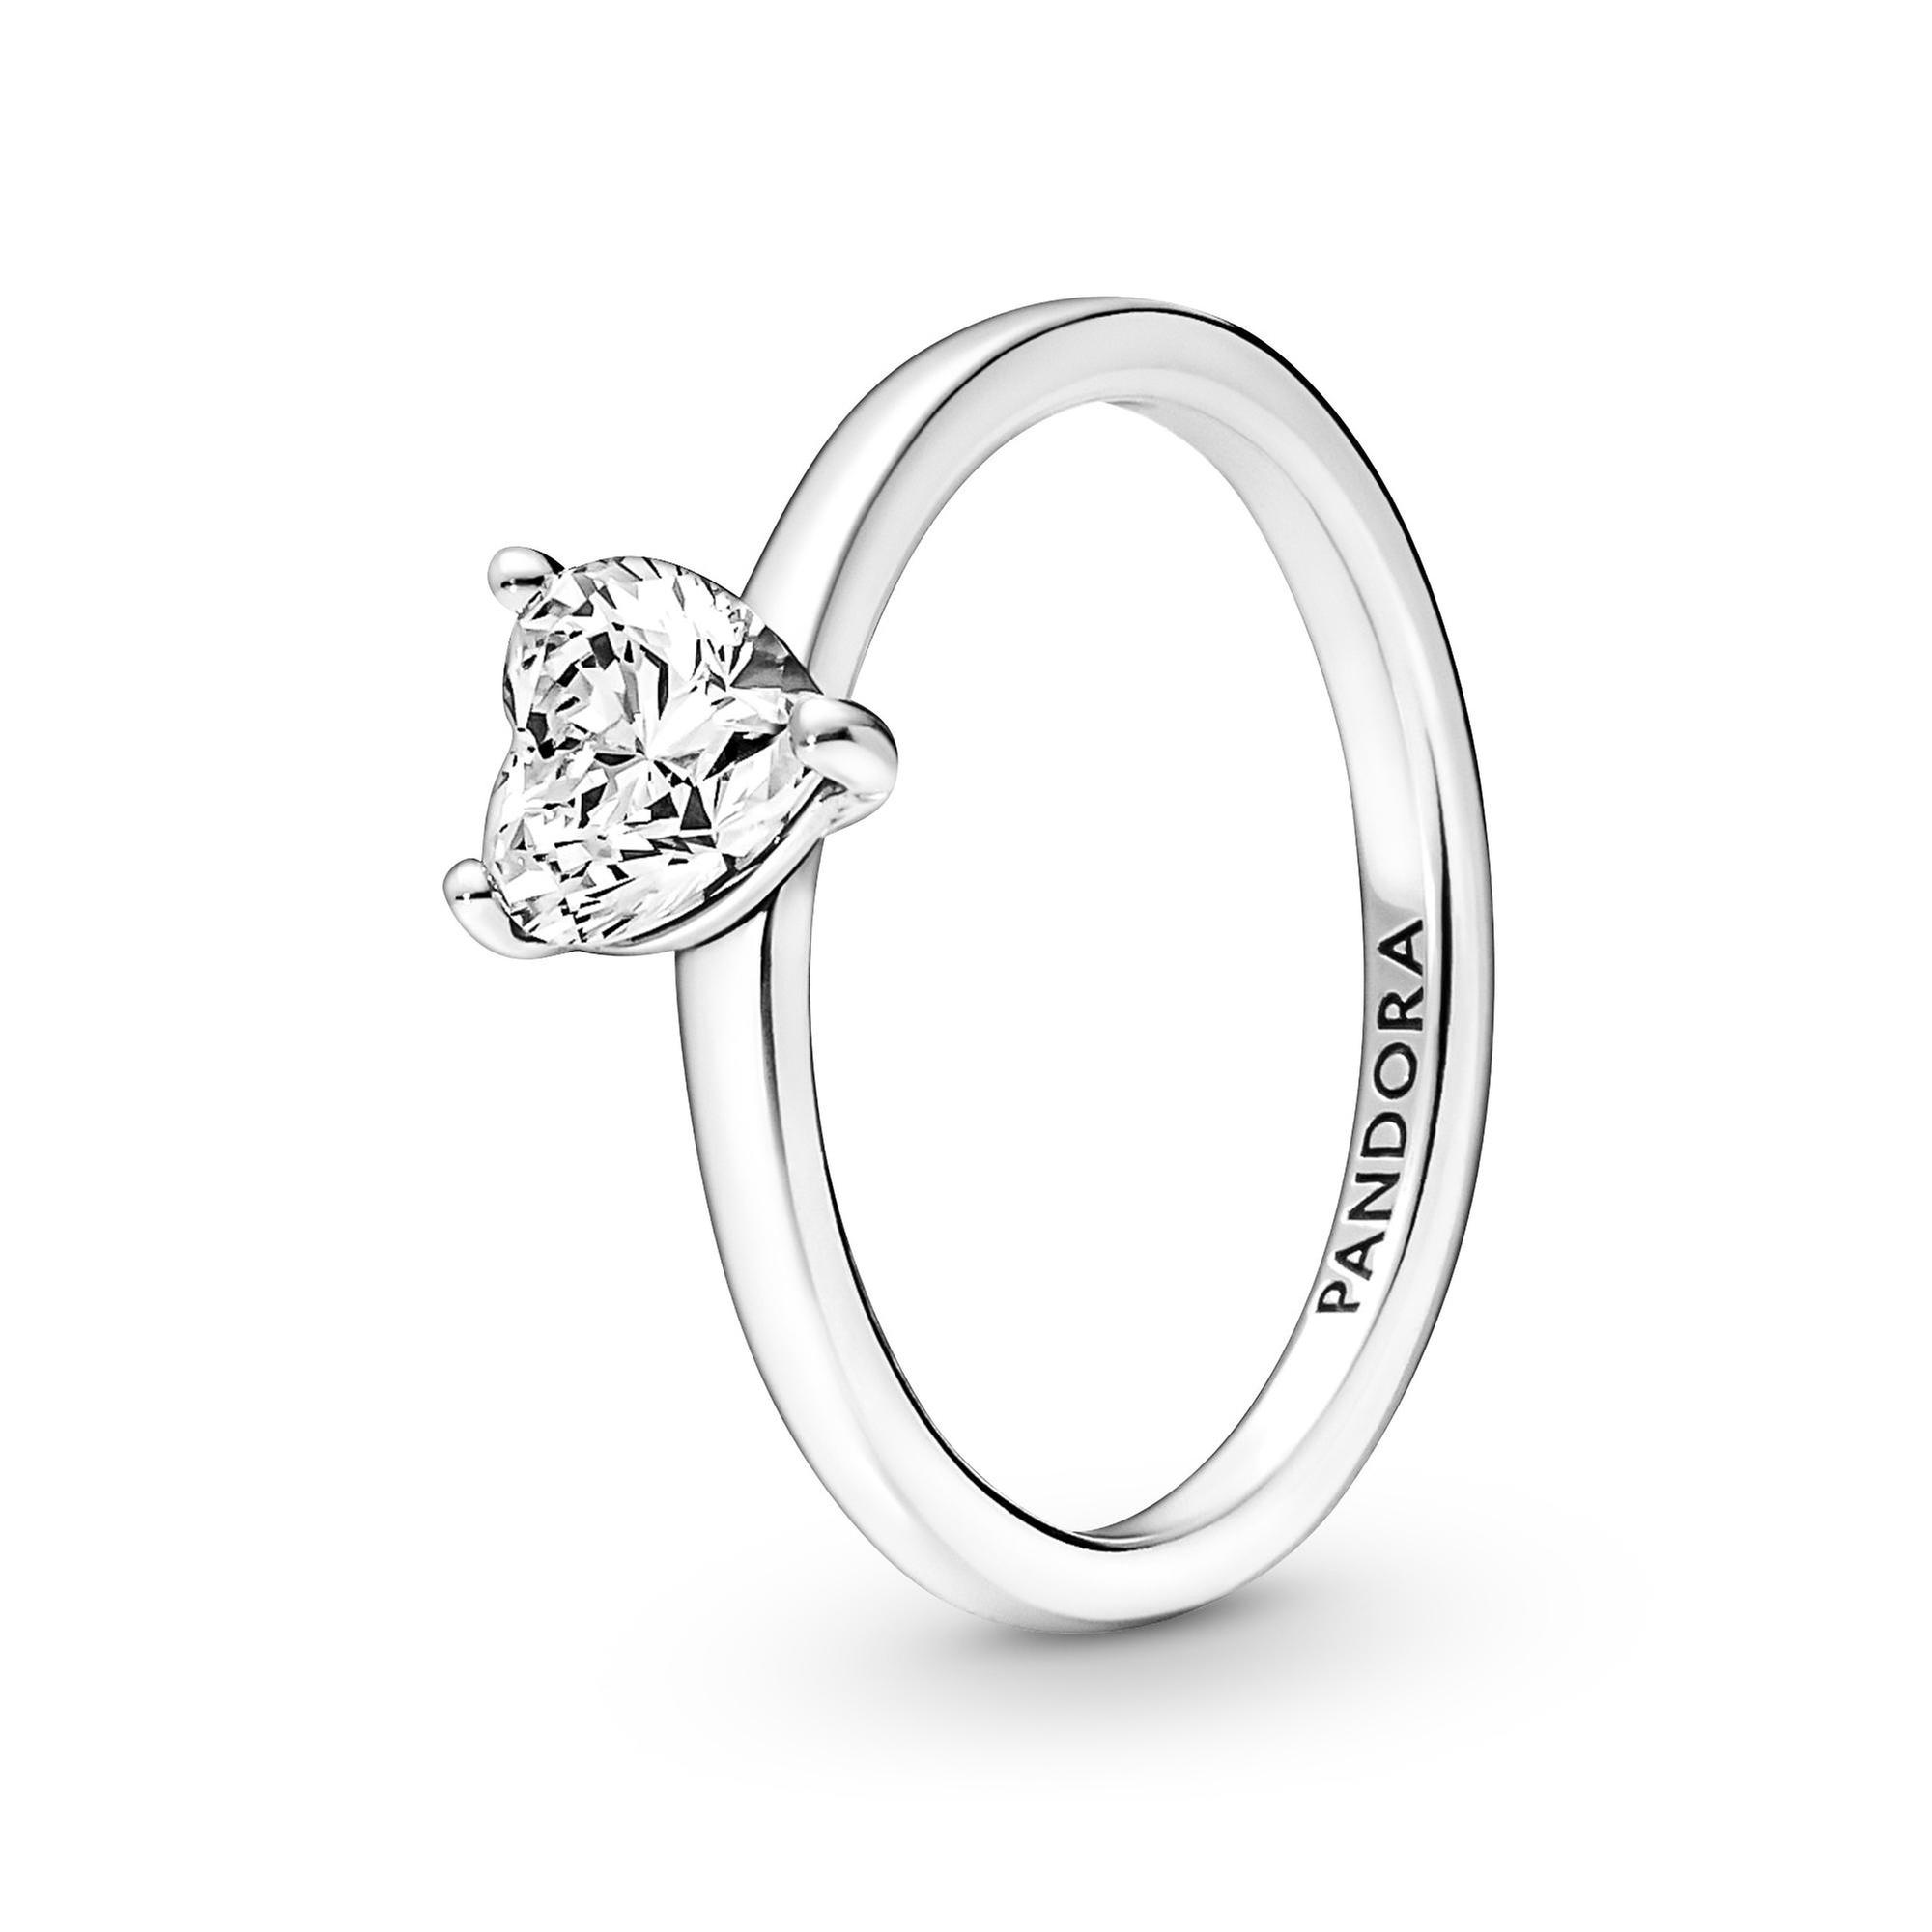 Pandora Sparkling Heart Solitaire Ring - Size 8.5